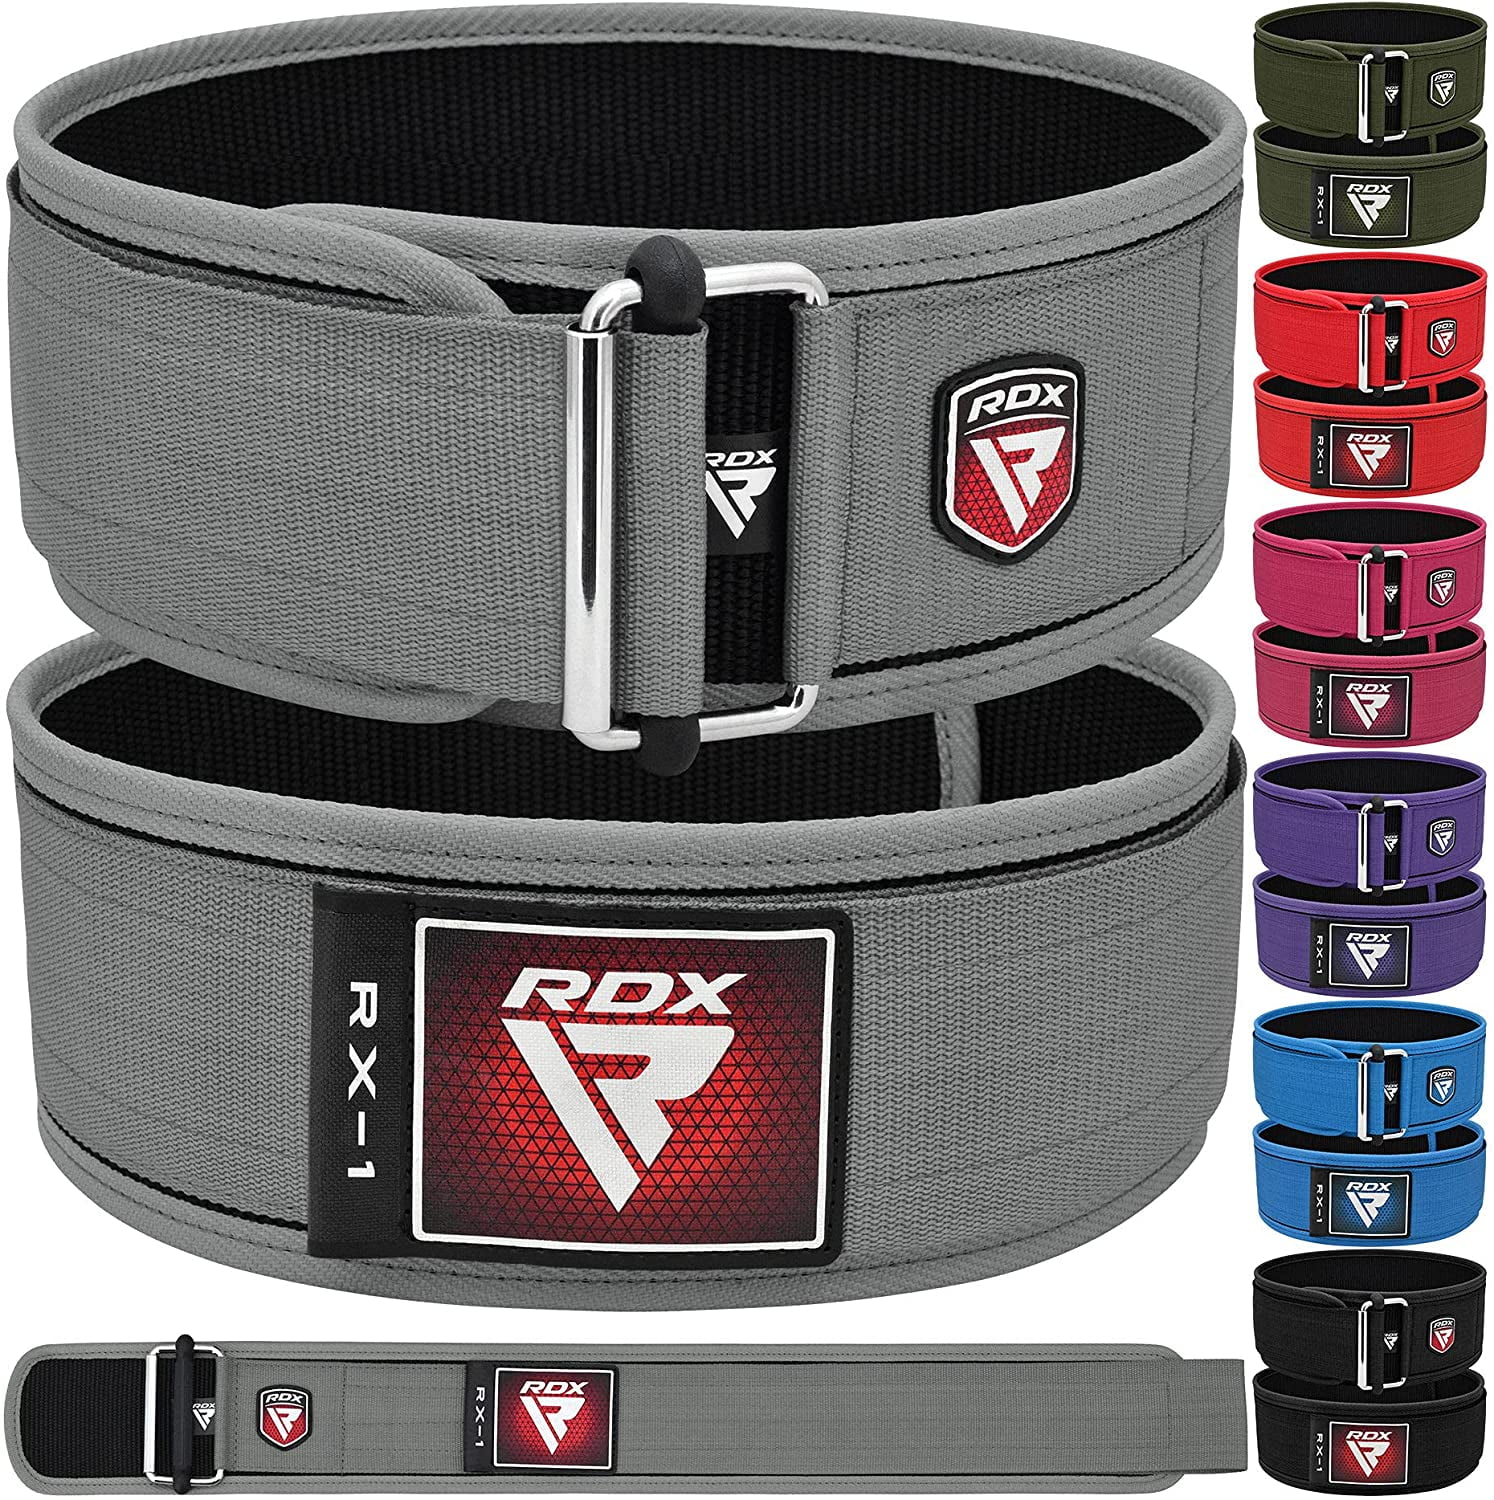 Weight Lifting Belt Back Support Gym Workout Fitness Training Strap 4"Power Belt 